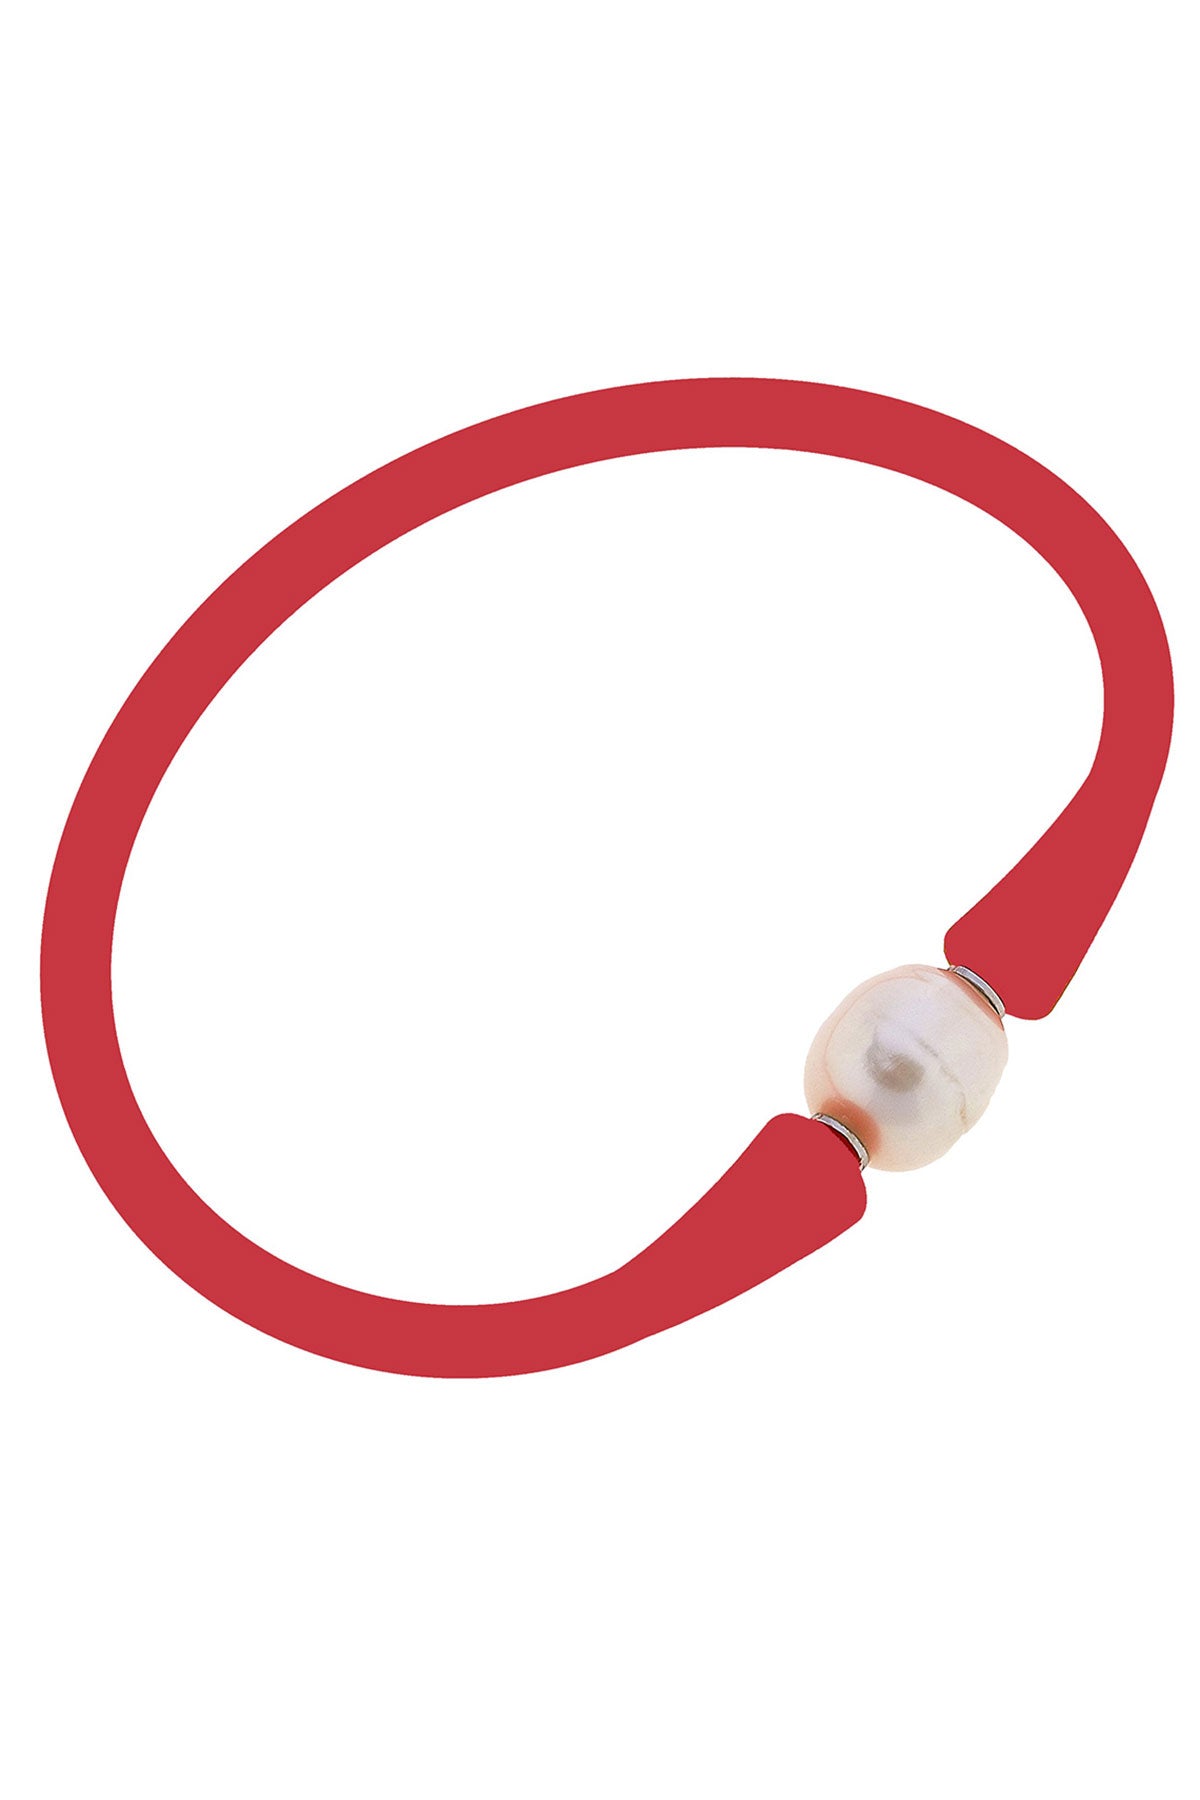 Bali Freshwater Pearl Silicone Bracelet in Red